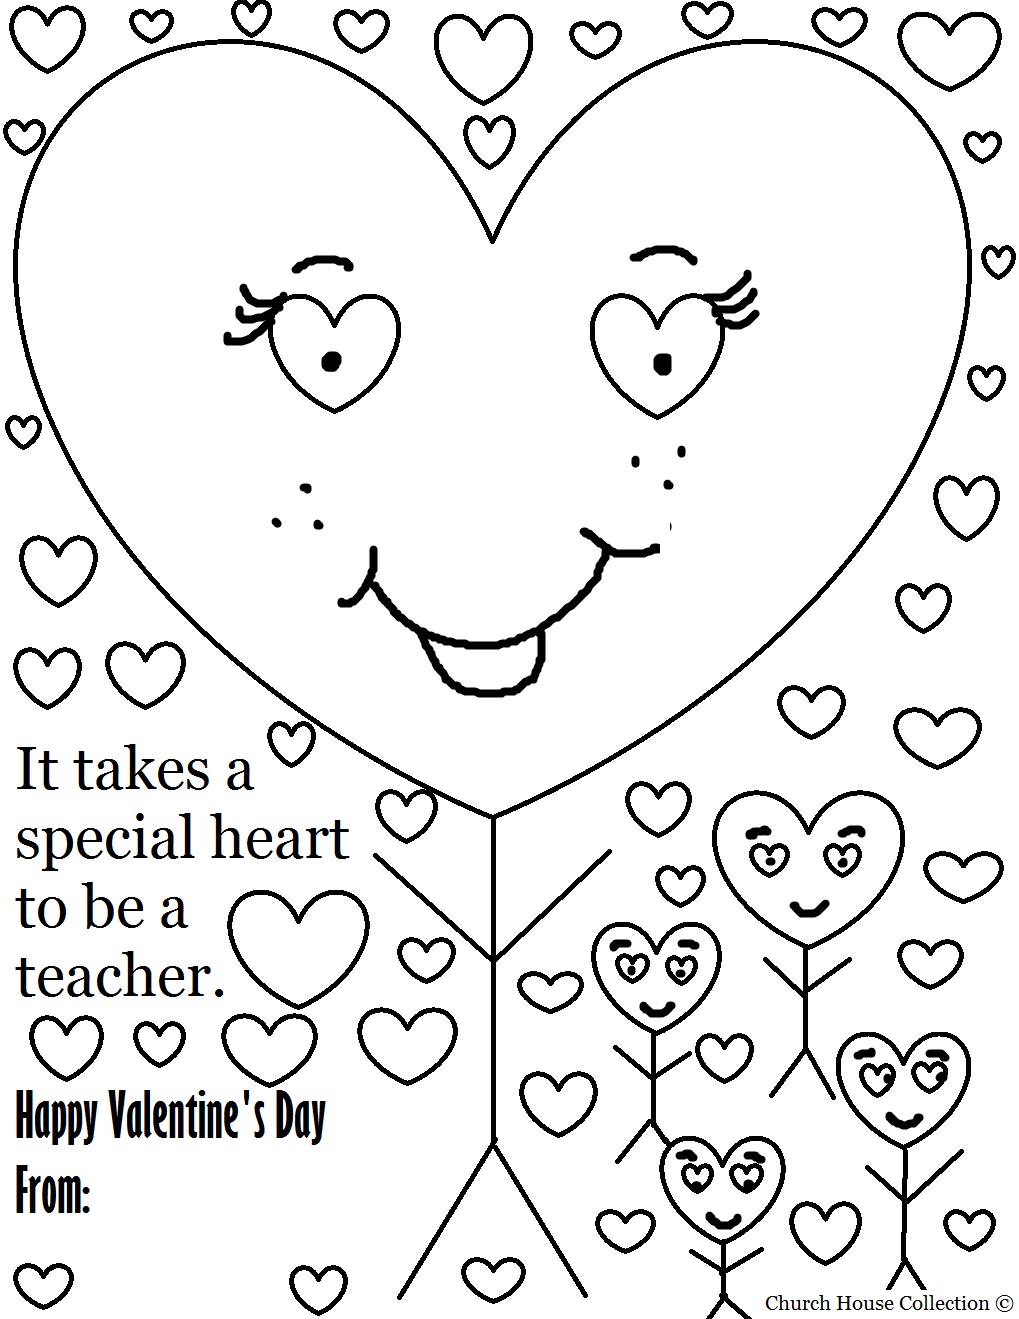 church-house-collection-blog-valentine-s-day-coloring-page-for-teacher